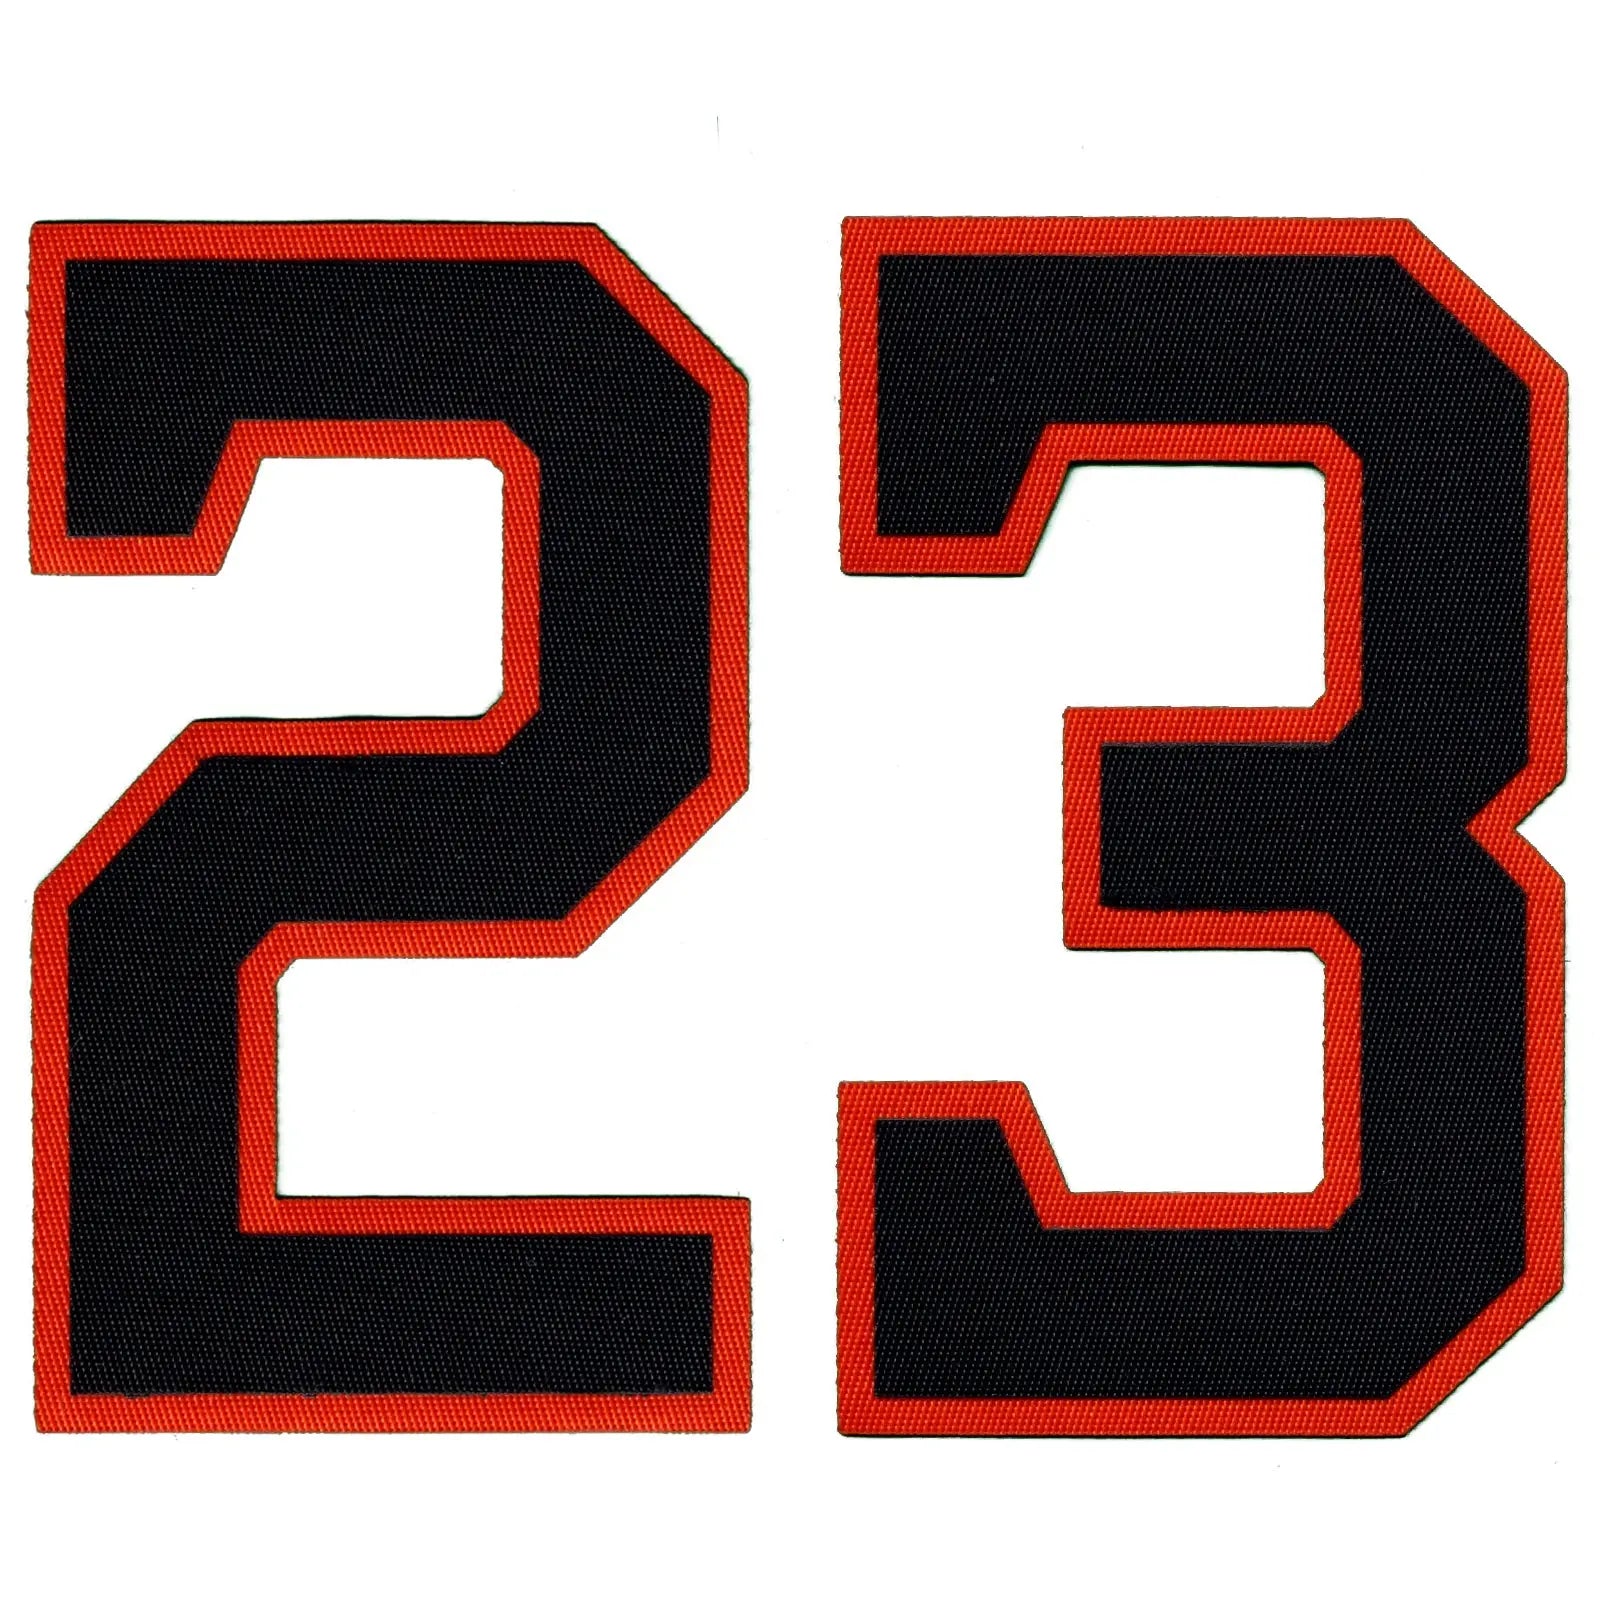 Houston Michael Brantley Front Number 23 Home & Away Jersey Lettering Kit Poly Pro Twill Iron-On 